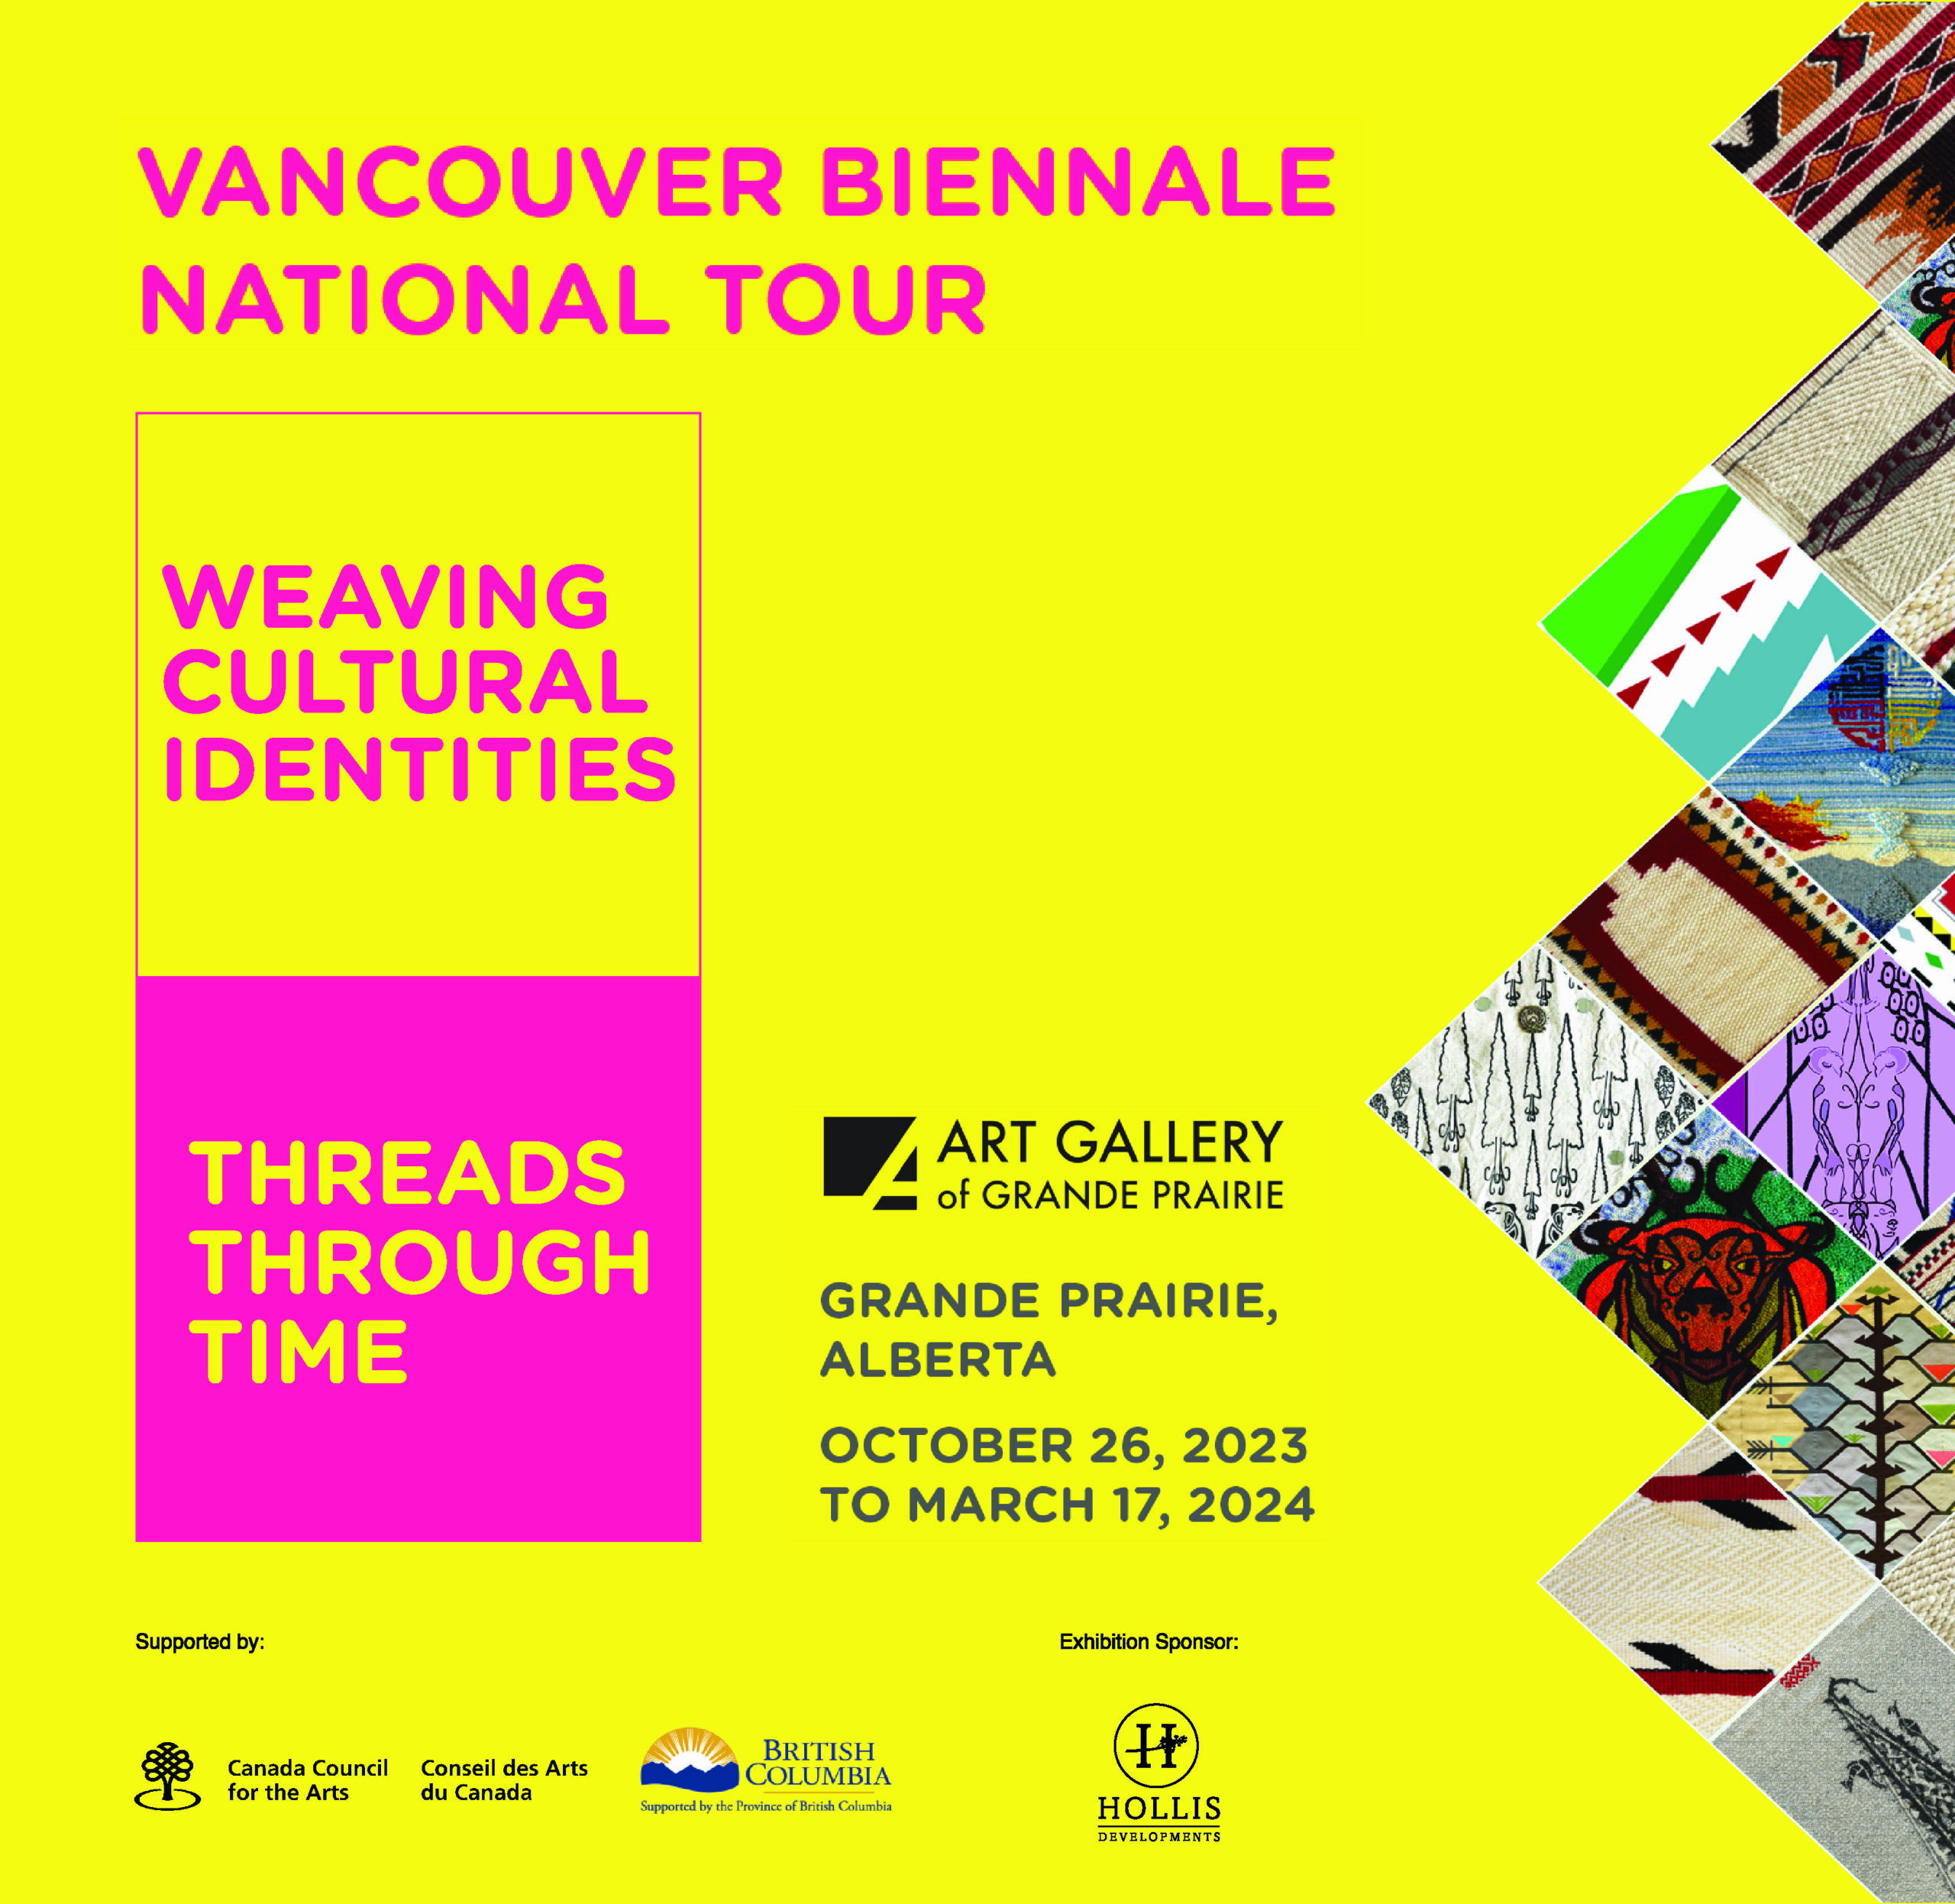 Threads through time and weaving cultural identities